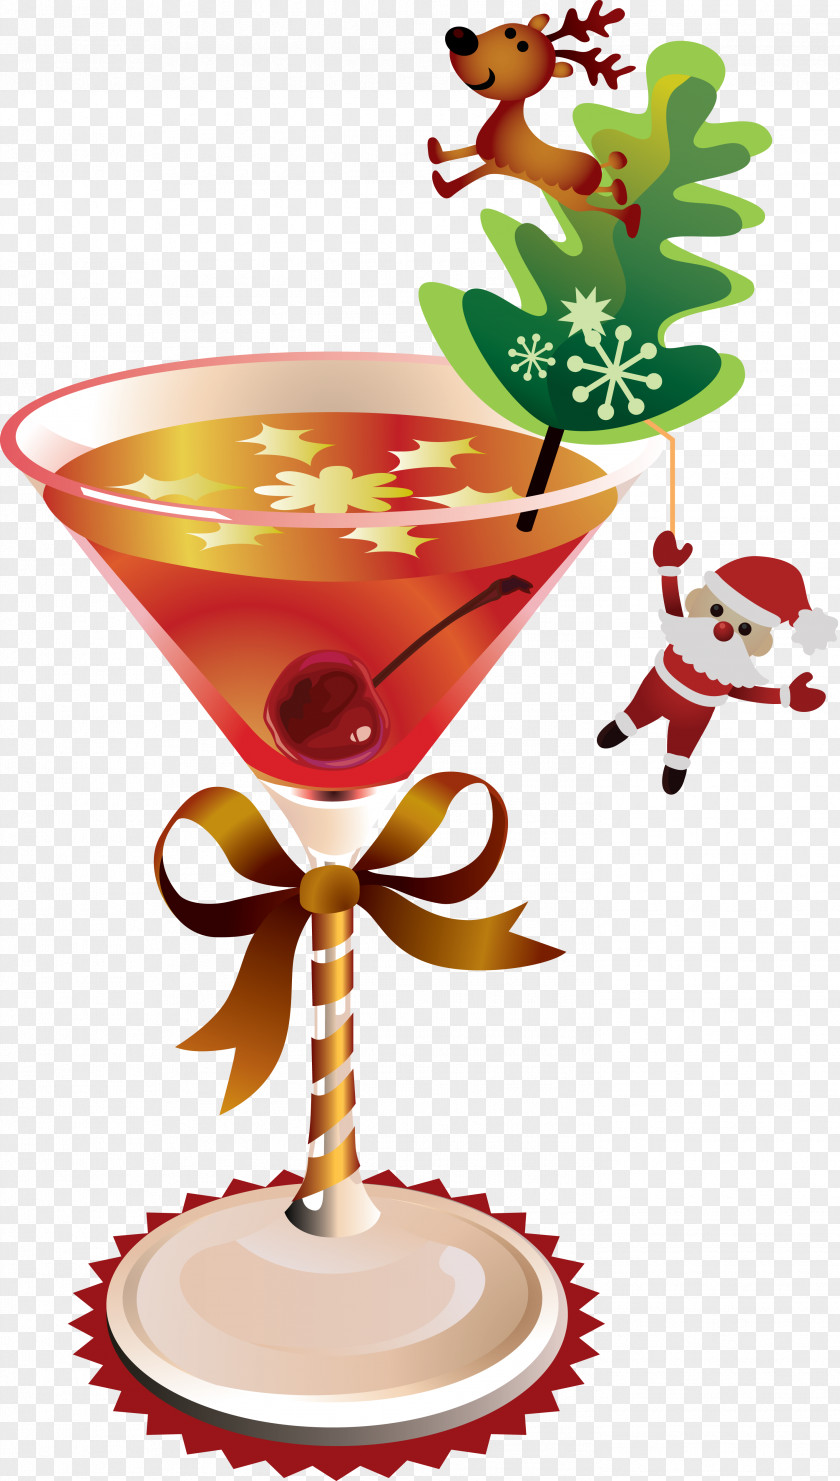 Cocktail Martini Candy Cane Christmas Alcoholic Drink Clip Art PNG